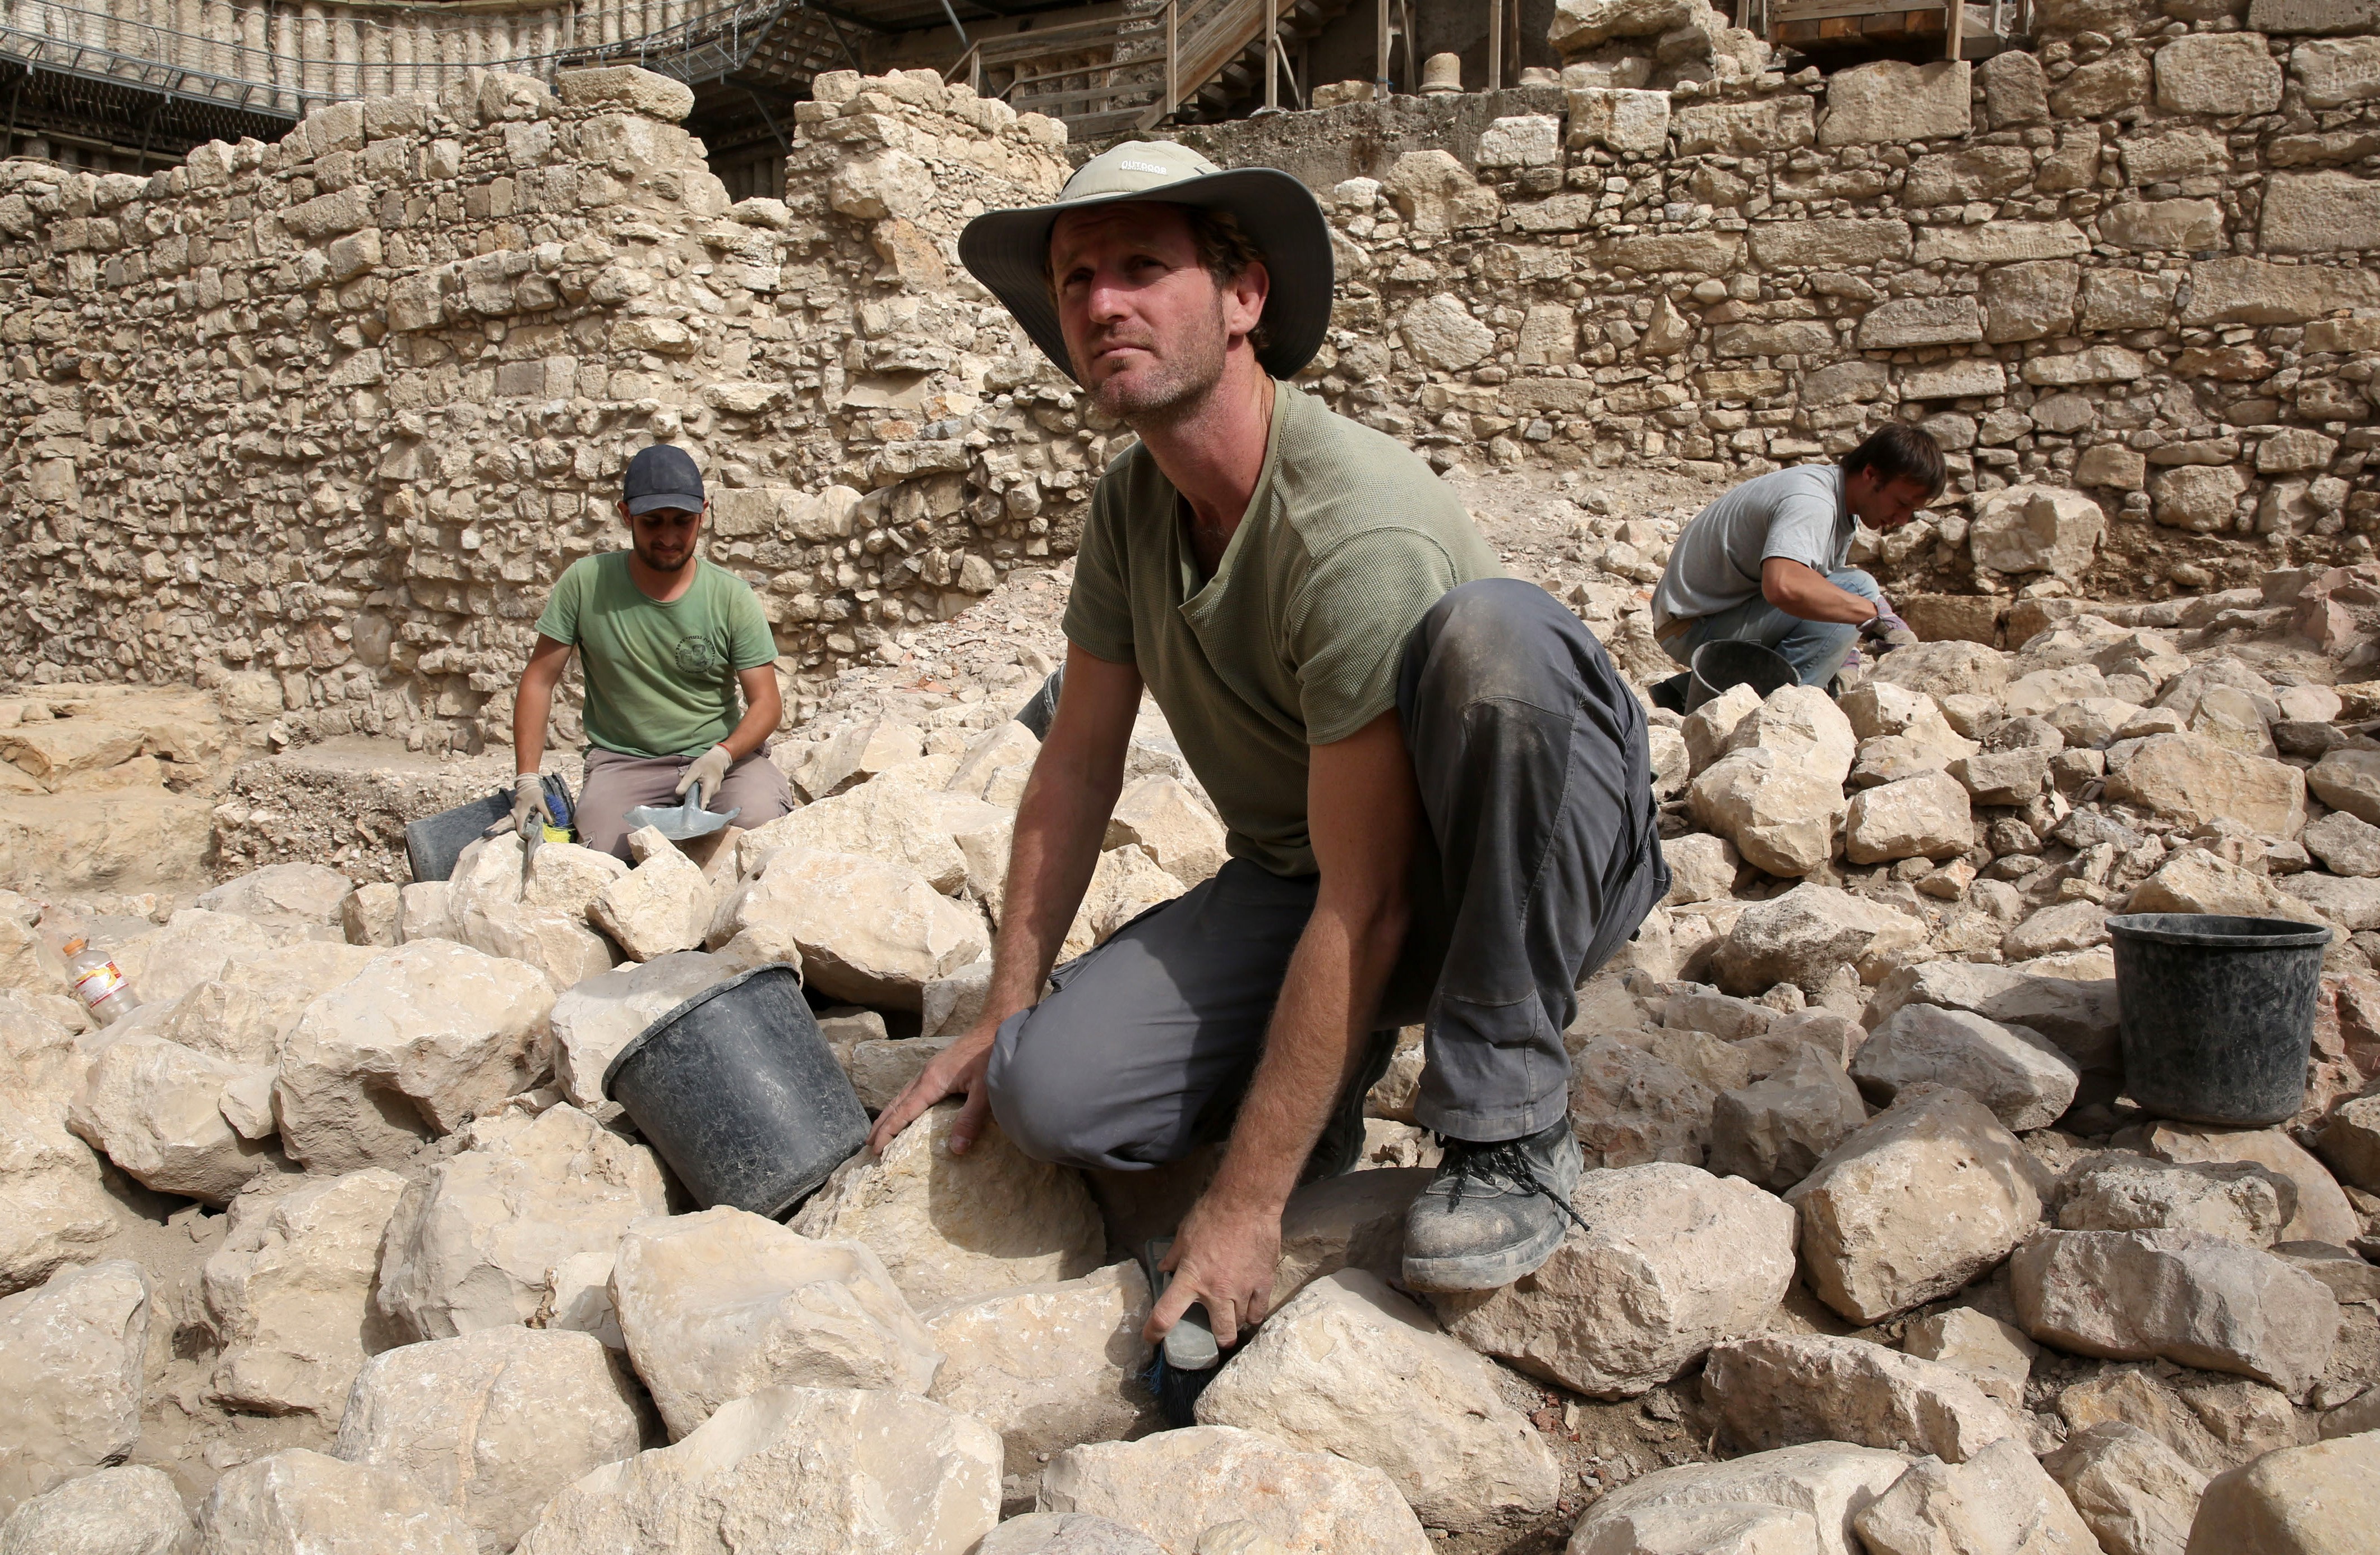 Workers from the Israeli Antiquity Authorities dig on November 3, 2015 at the excavation site near the City of David adjacent to Jerusalem's Old City walls where researchers believe to have found the remains of the stronghold the Acra (Gali Tibbon—AFP/Getty Images)